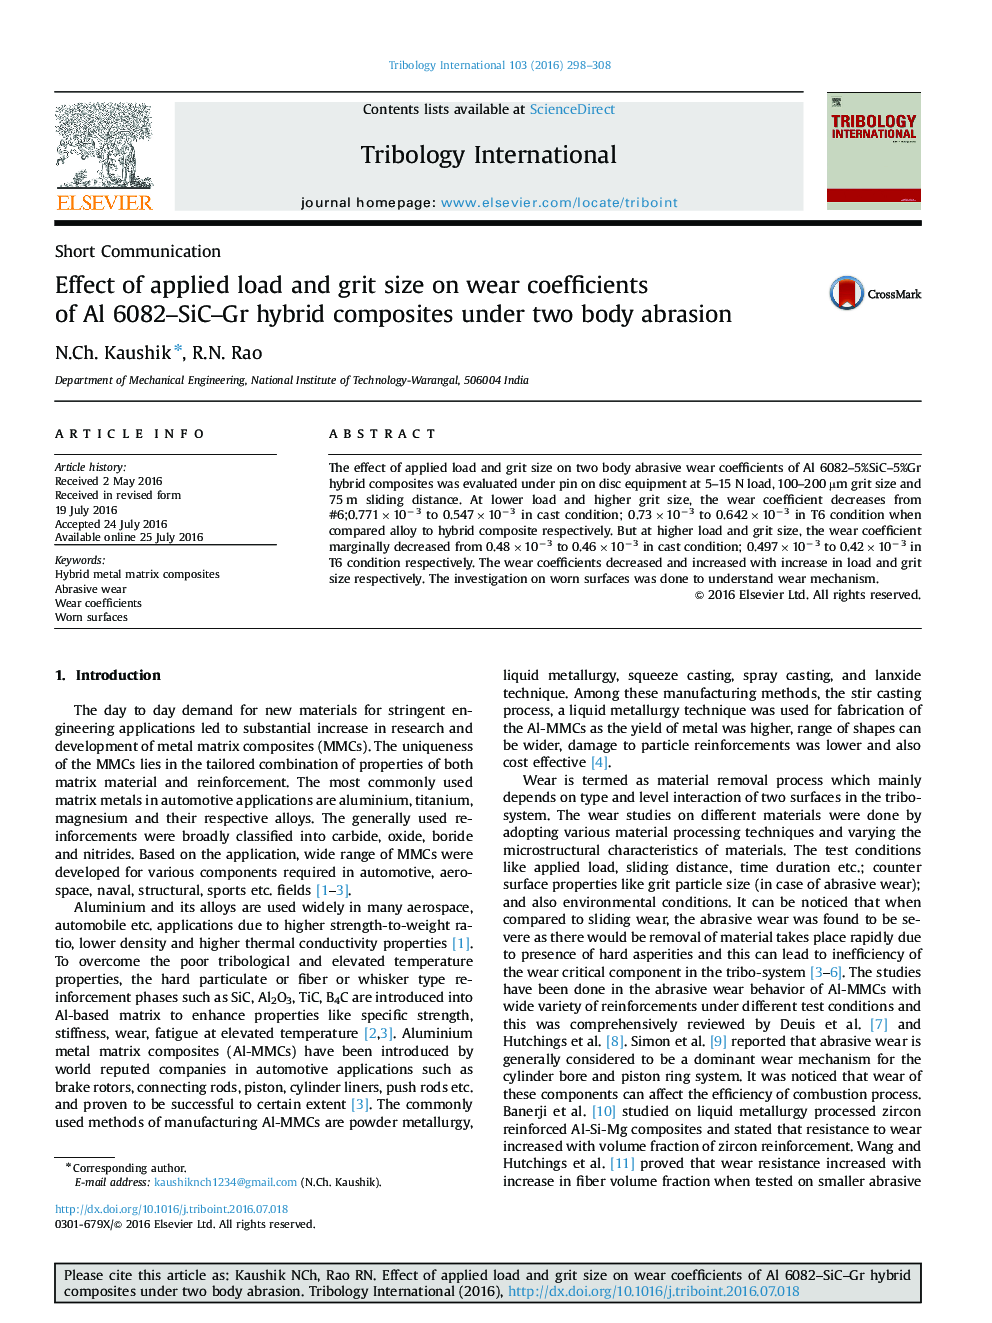 Effect of applied load and grit size on wear coefficients of Al 6082-SiC-Gr hybrid composites under two body abrasion